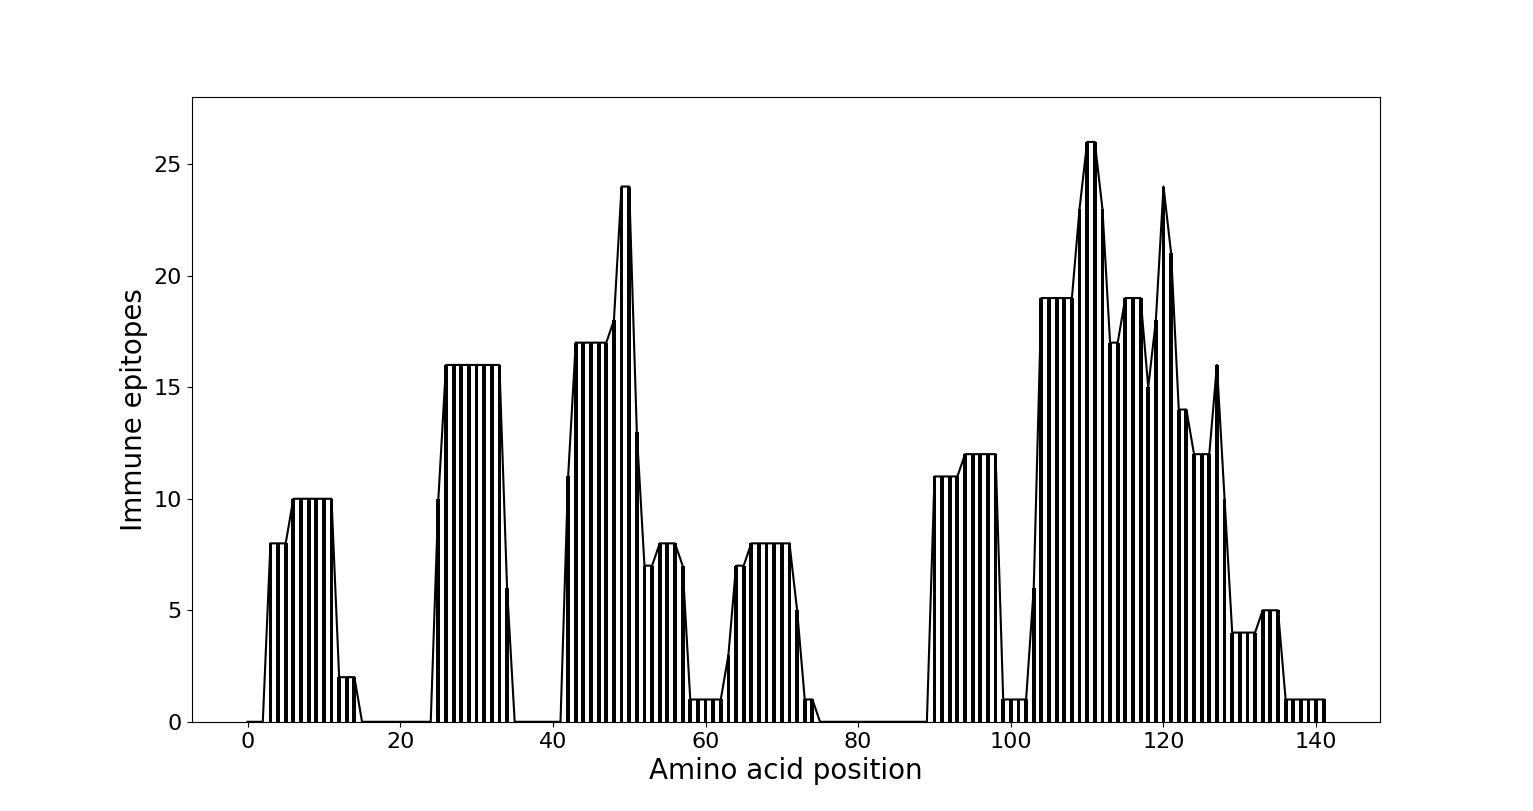 Figure 5.1 T-Cell immune epitopes before the deimmunization workflow shown as combined bar-/lineplot. For each amino acid position, the number of MHC class II epitopes  is plotted. Note that there is a prominent cluster of amino acid between residue 100-130 which are part of many immune epitopes.